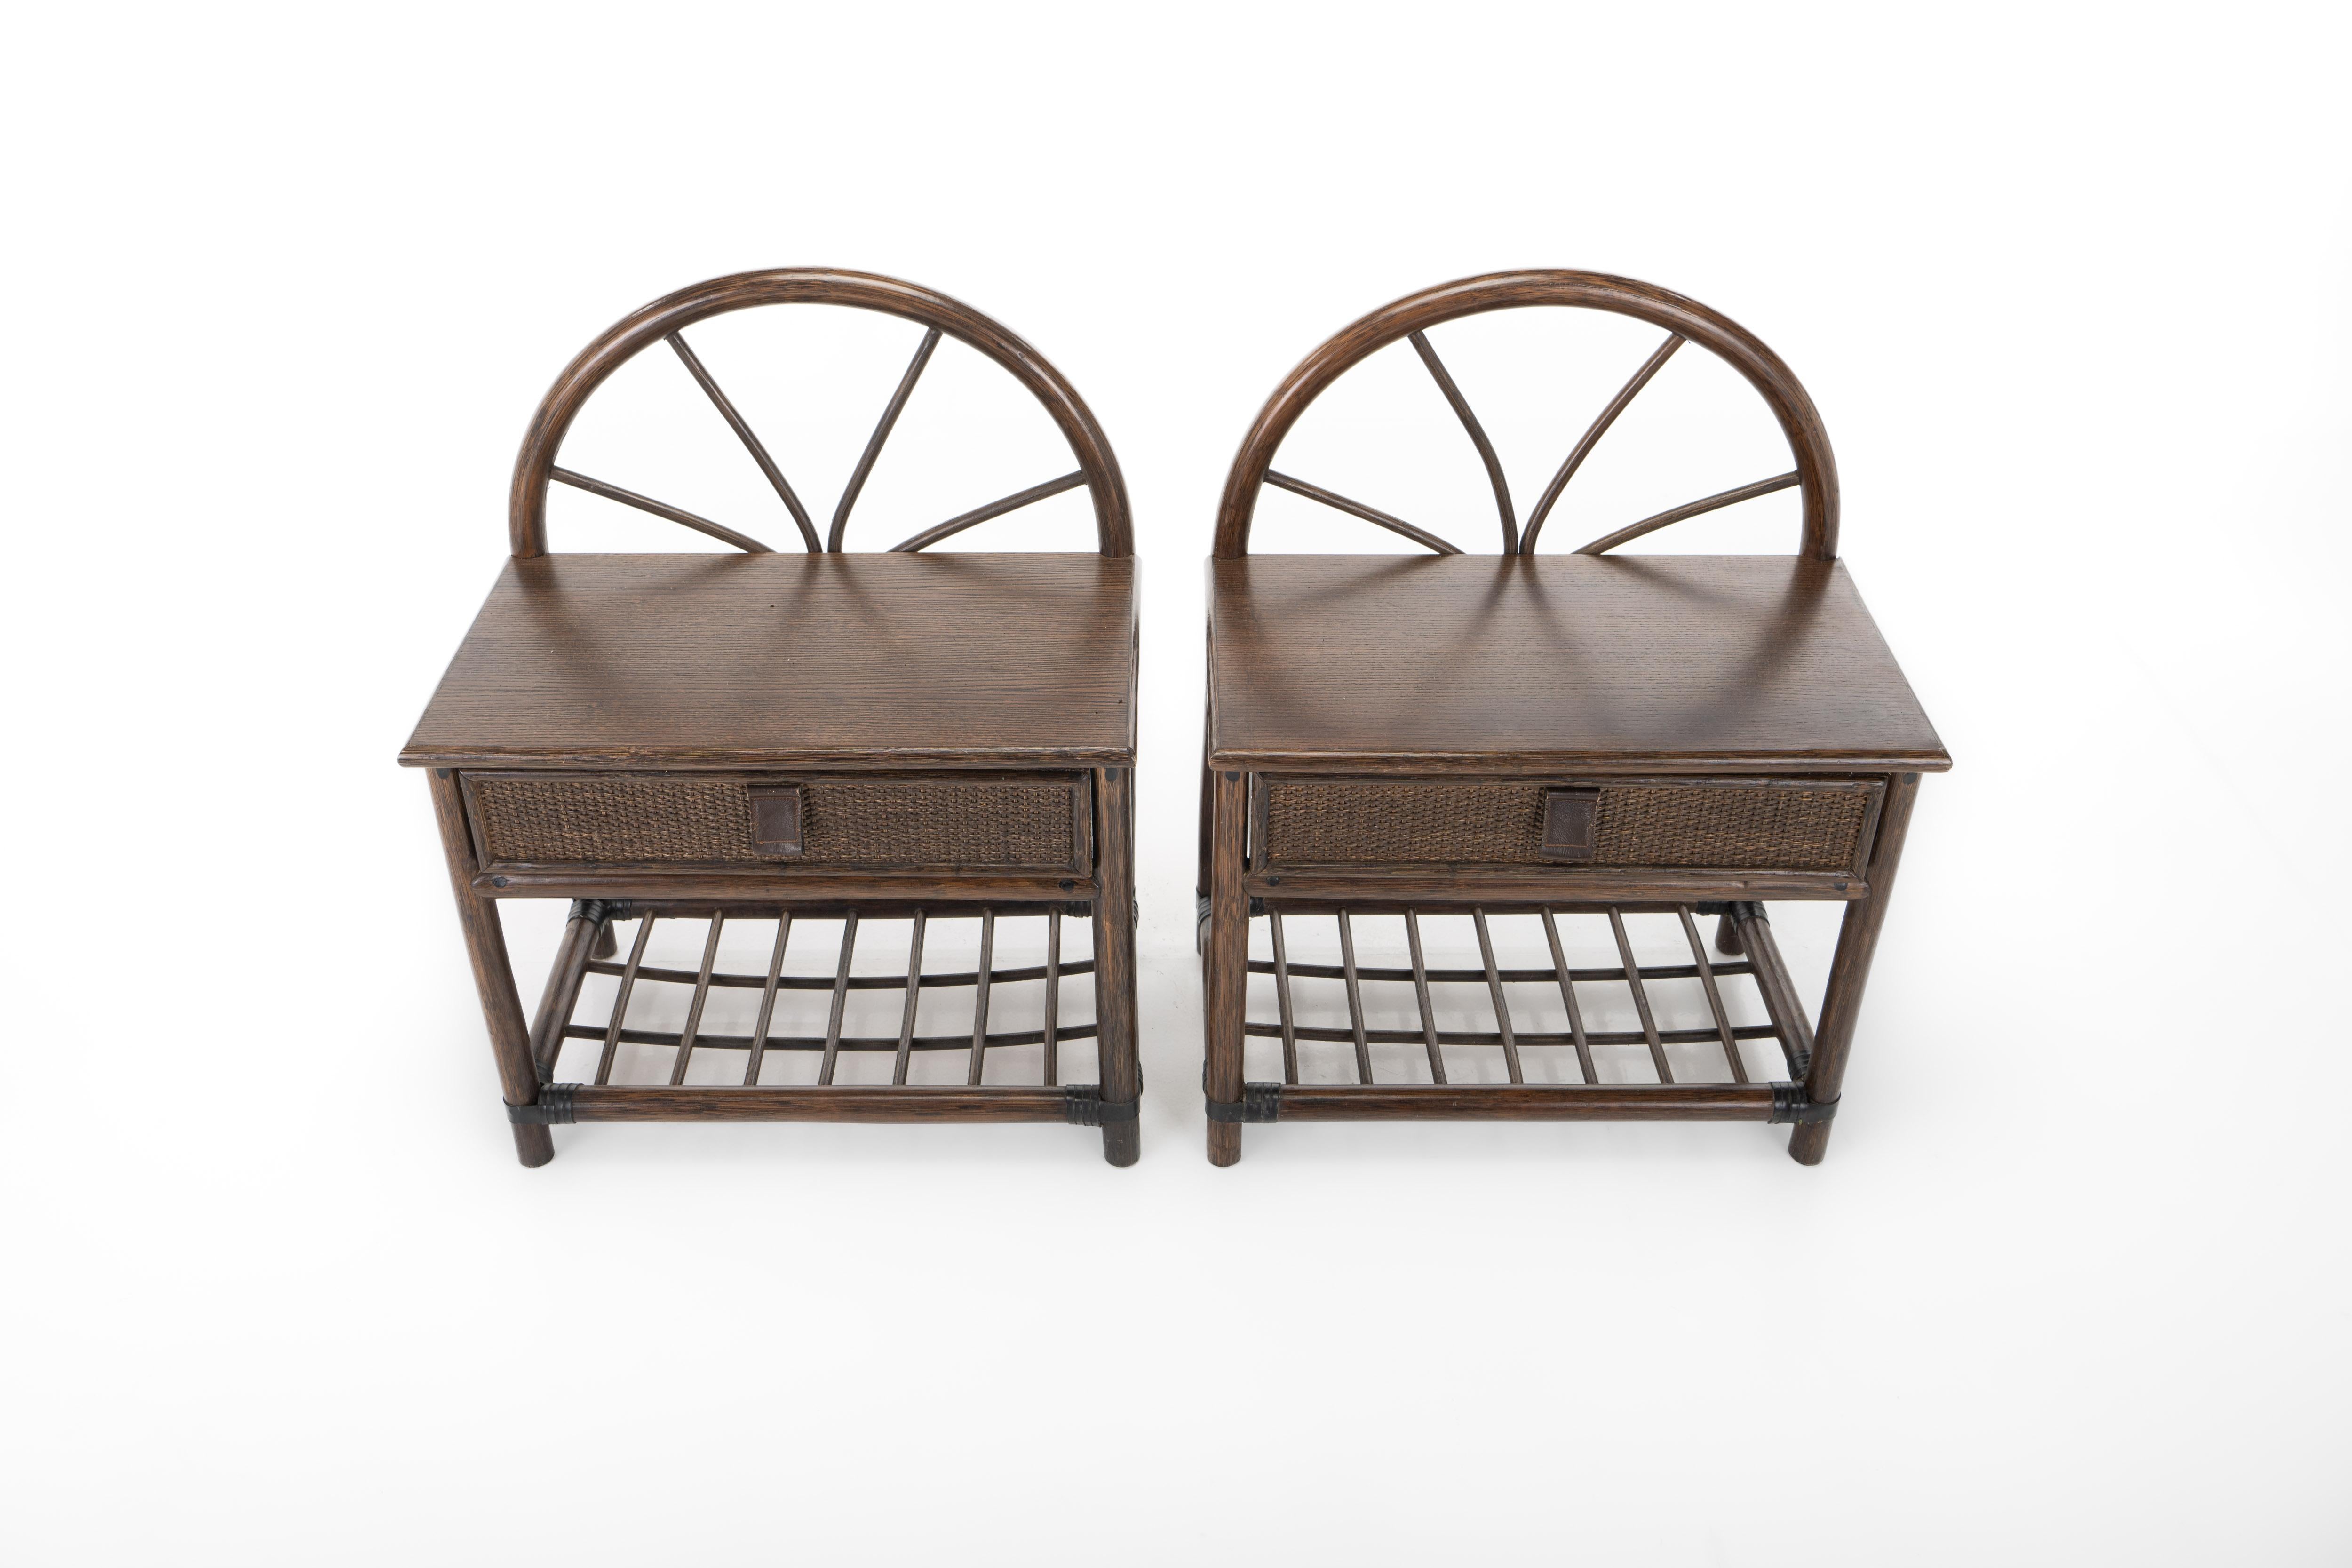 Pair of bedside tables in bamboo and rattan. The tables each have a drawer with a leather handle. An extra nice detail is the curved top in the shape of a sun.